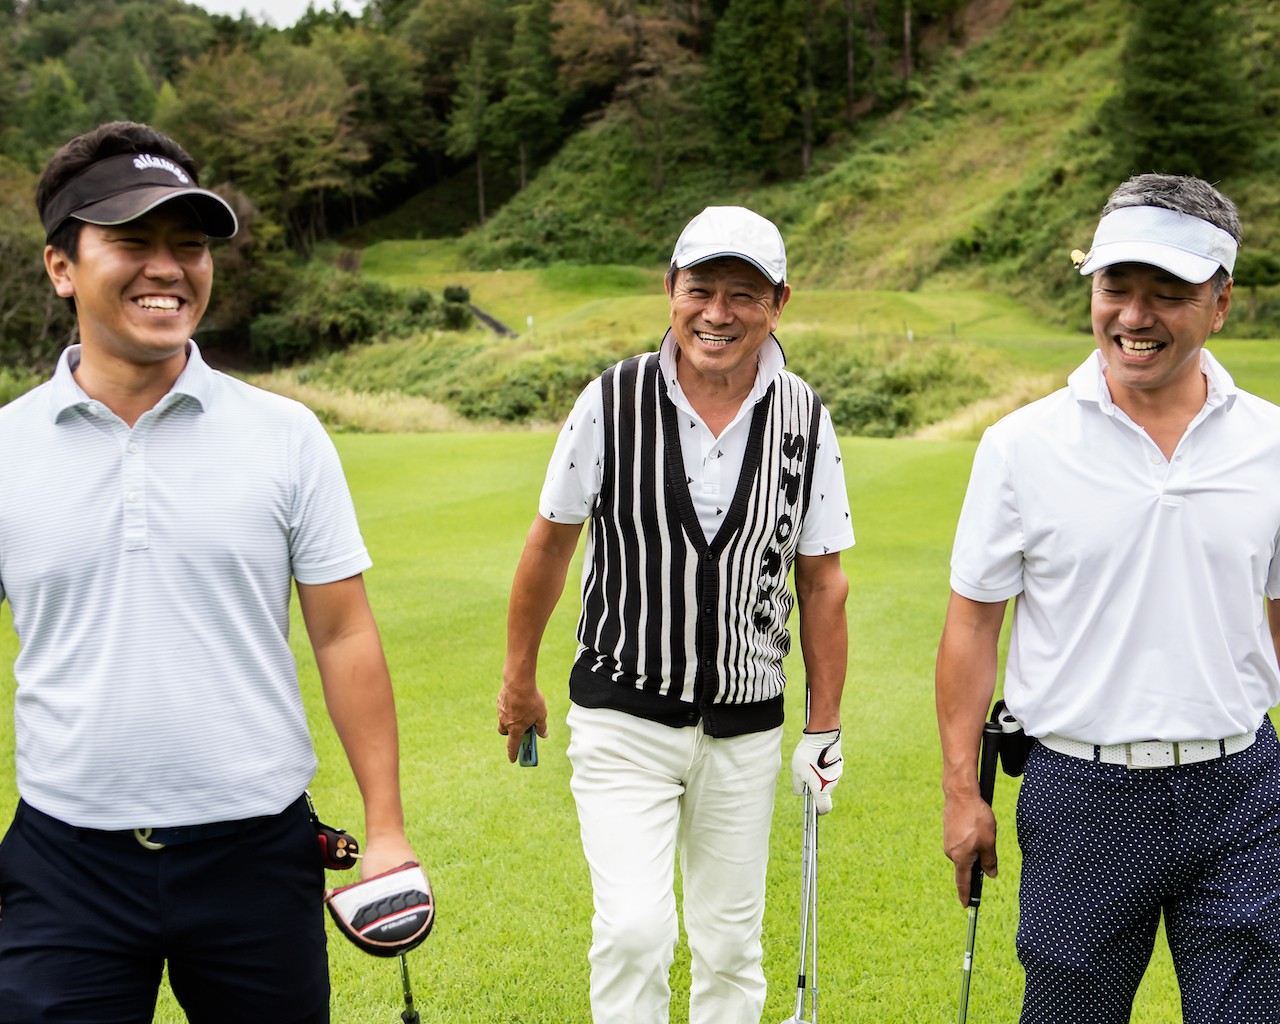 Three golfers smiling on course